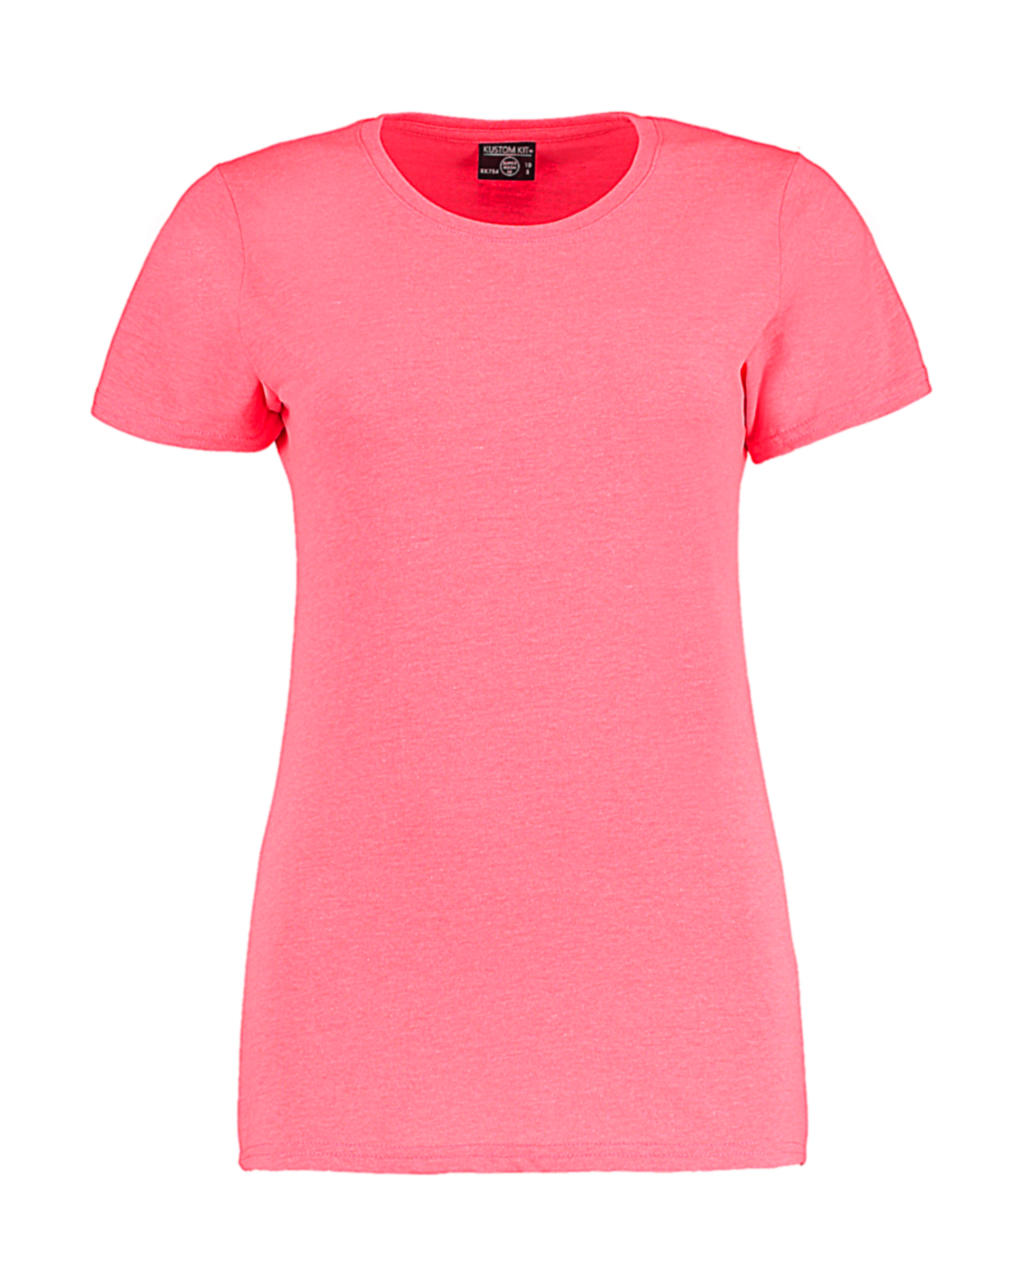  Womens Fashion Fit Superwash? 60? Tee in Farbe Coral Marl